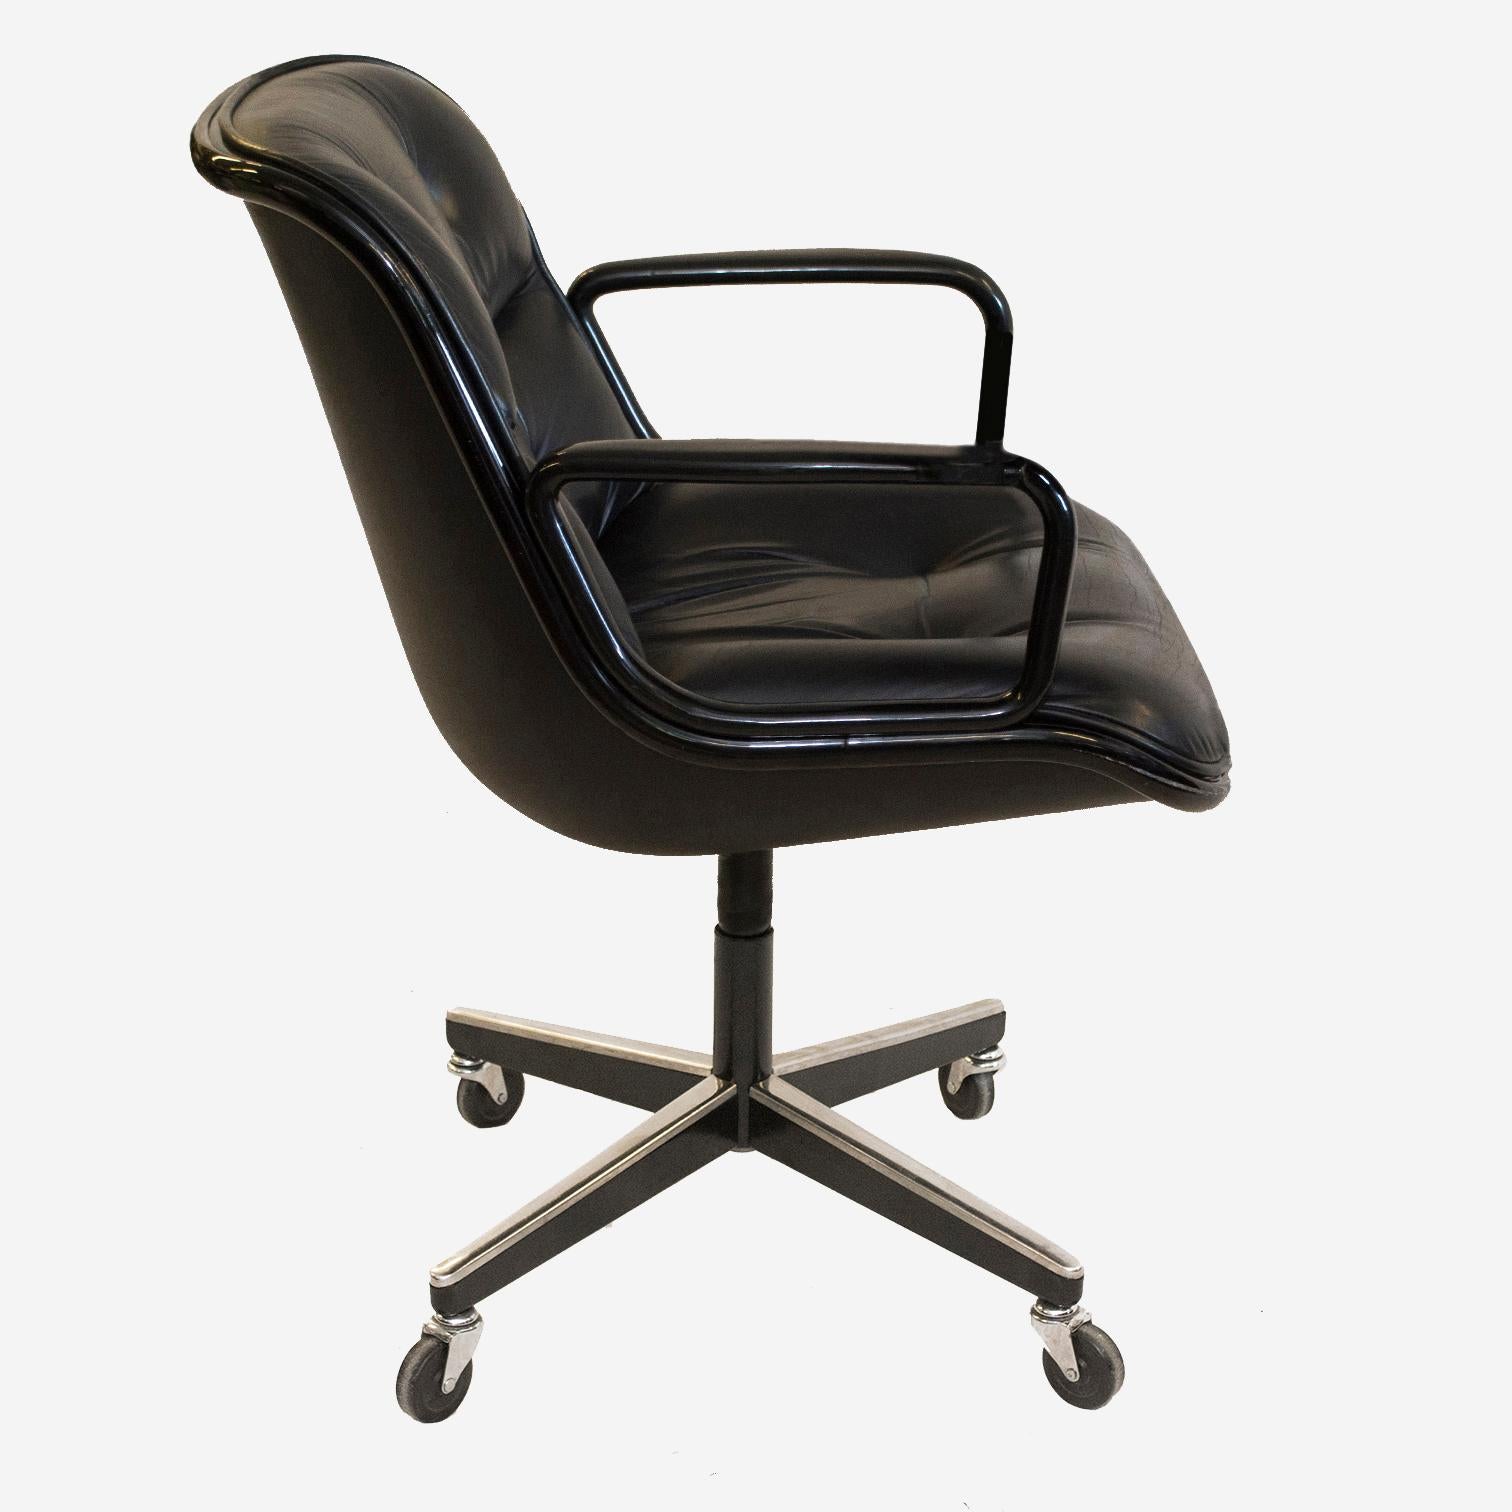 Mid-Century Modern Knoll Pollock Executive Chair in Original Black Leather, Matte Black Frame For Sale